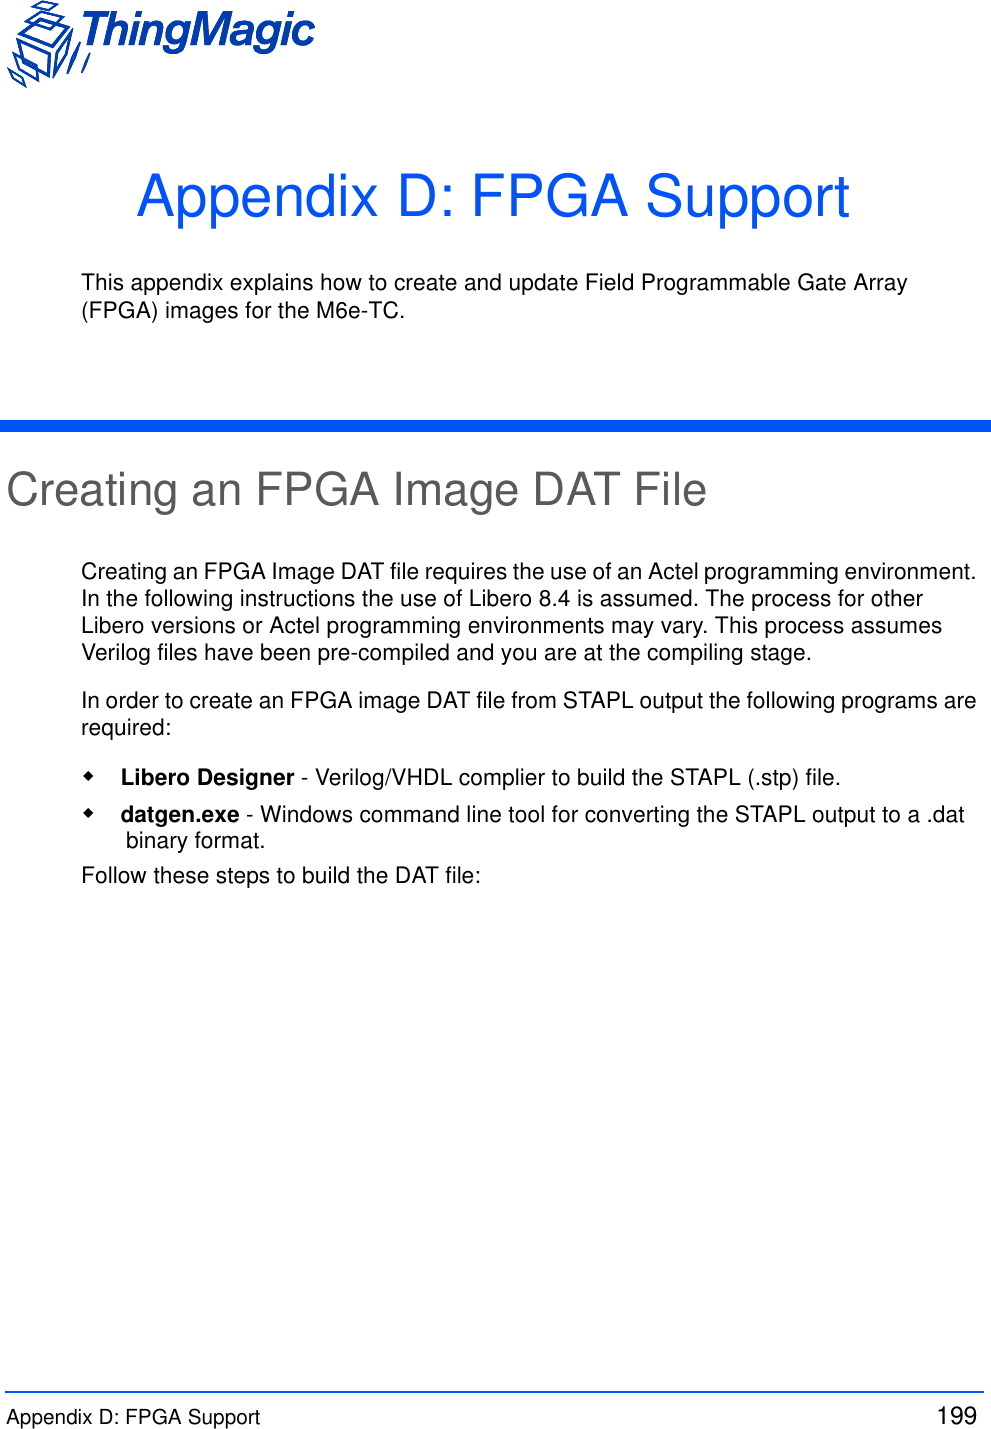 Appendix D: FPGA Support  199 Appendix D: FPGA SupportThis appendix explains how to create and update Field Programmable Gate Array (FPGA) images for the M6e-TC.Creating an FPGA Image DAT FileCreating an FPGA Image DAT file requires the use of an Actel programming environment. In the following instructions the use of Libero 8.4 is assumed. The process for other Libero versions or Actel programming environments may vary. This process assumes Verilog files have been pre-compiled and you are at the compiling stage.In order to create an FPGA image DAT file from STAPL output the following programs are required: Libero Designer - Verilog/VHDL complier to build the STAPL (.stp) file.  datgen.exe - Windows command line tool for converting the STAPL output to a .dat binary format. Follow these steps to build the DAT file: